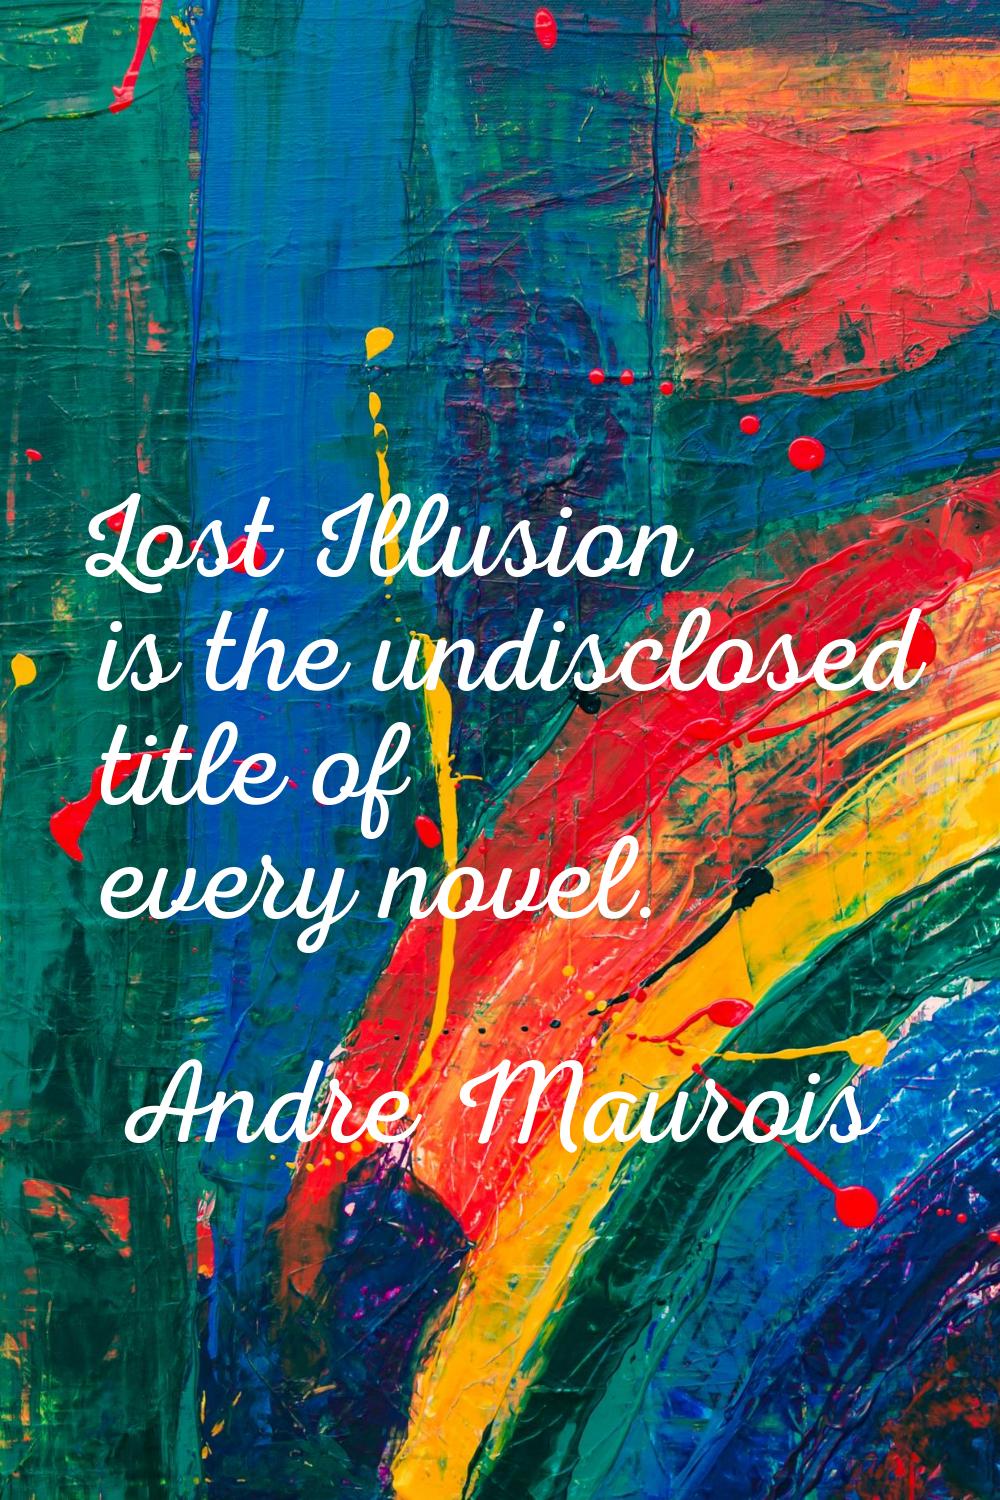 Lost Illusion is the undisclosed title of every novel.